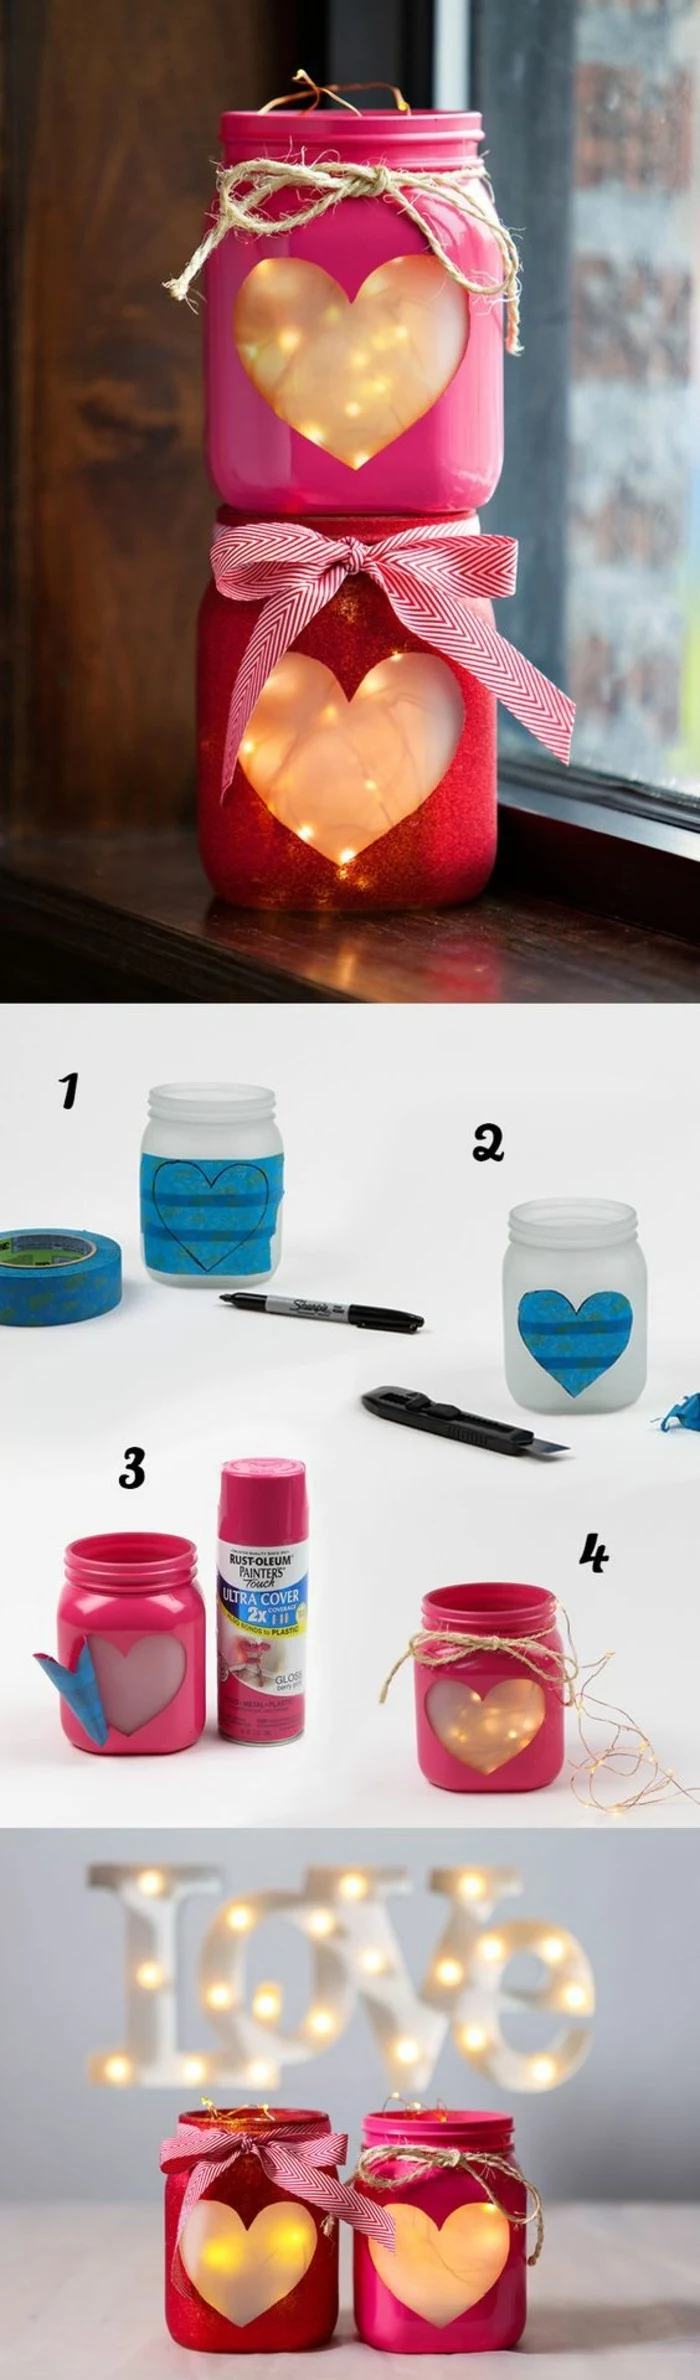 step by step, diy tutorial, candle holders, mason jar, lights and candles inside, creative birthday ideas for boyfriend